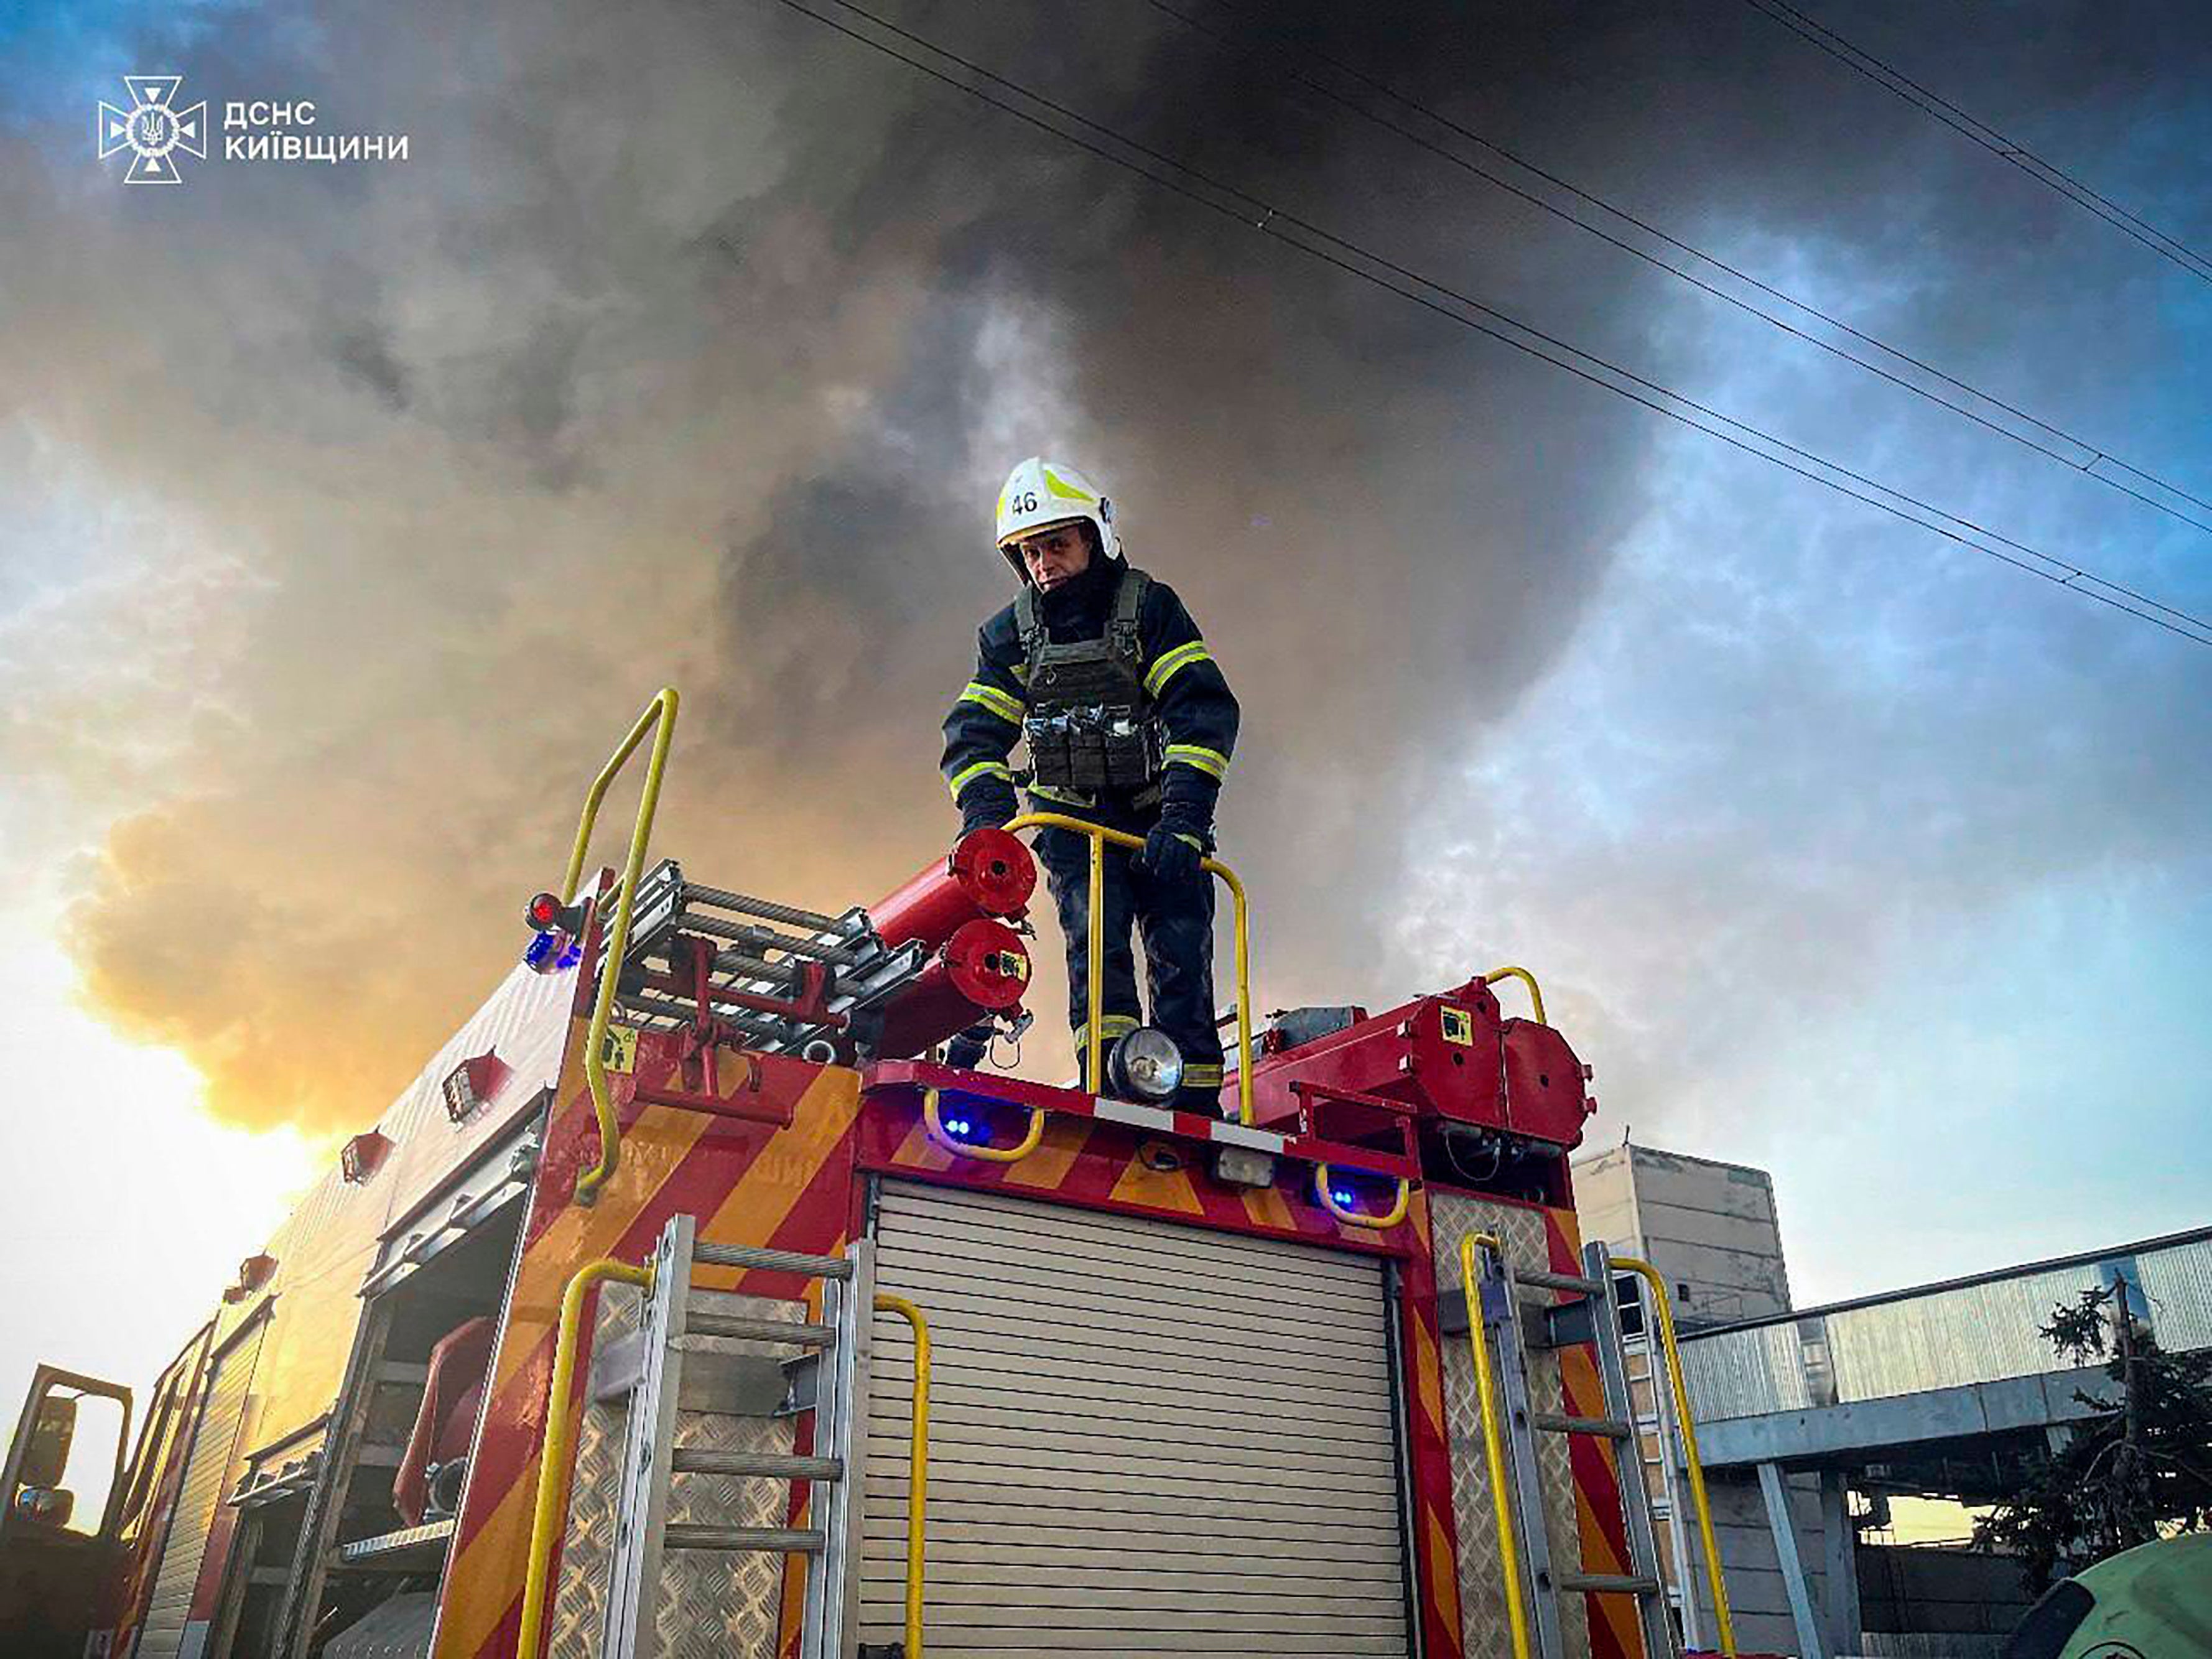 An emergency worker extinguishes a fire after a Russian attack on The Trypilska plant